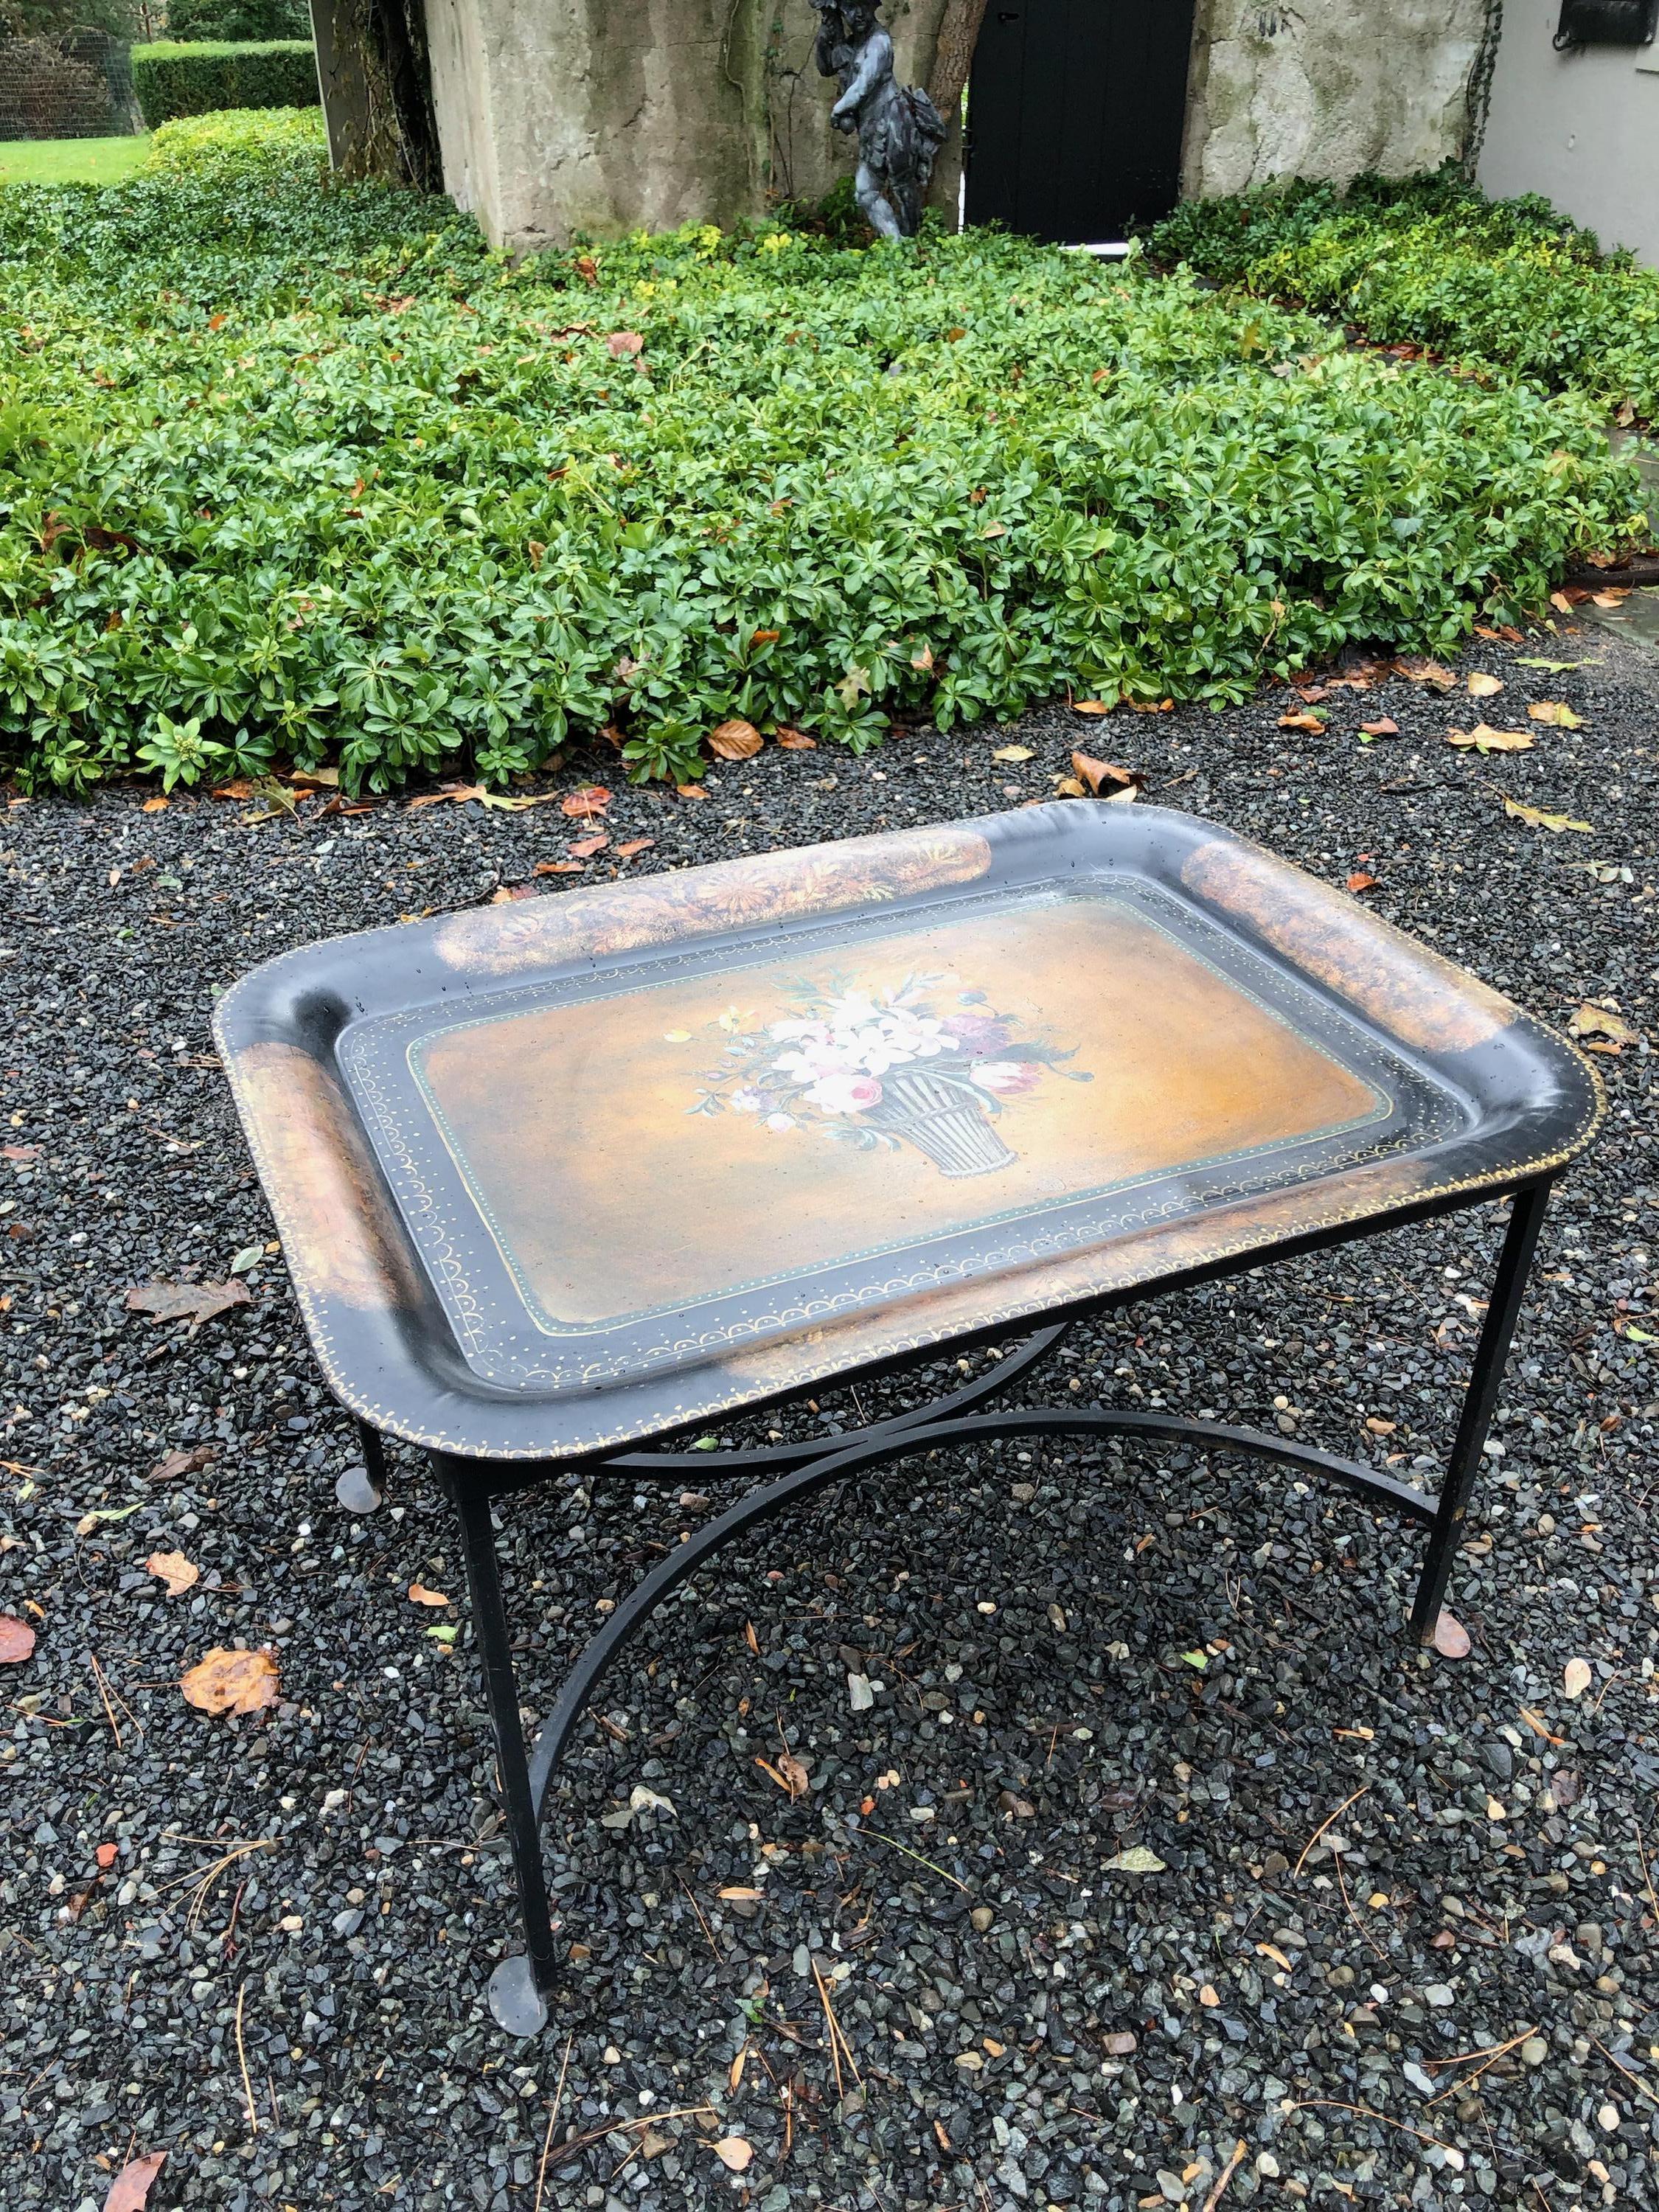 Vintage hand painted tole tray coffee table having an inset tray in a custom hand forged black iron base. The tray has rolled edges and back is in black paint with no markings. The base is new. The tray measures 28.25” wide x 21” deep x 1.5” tall.